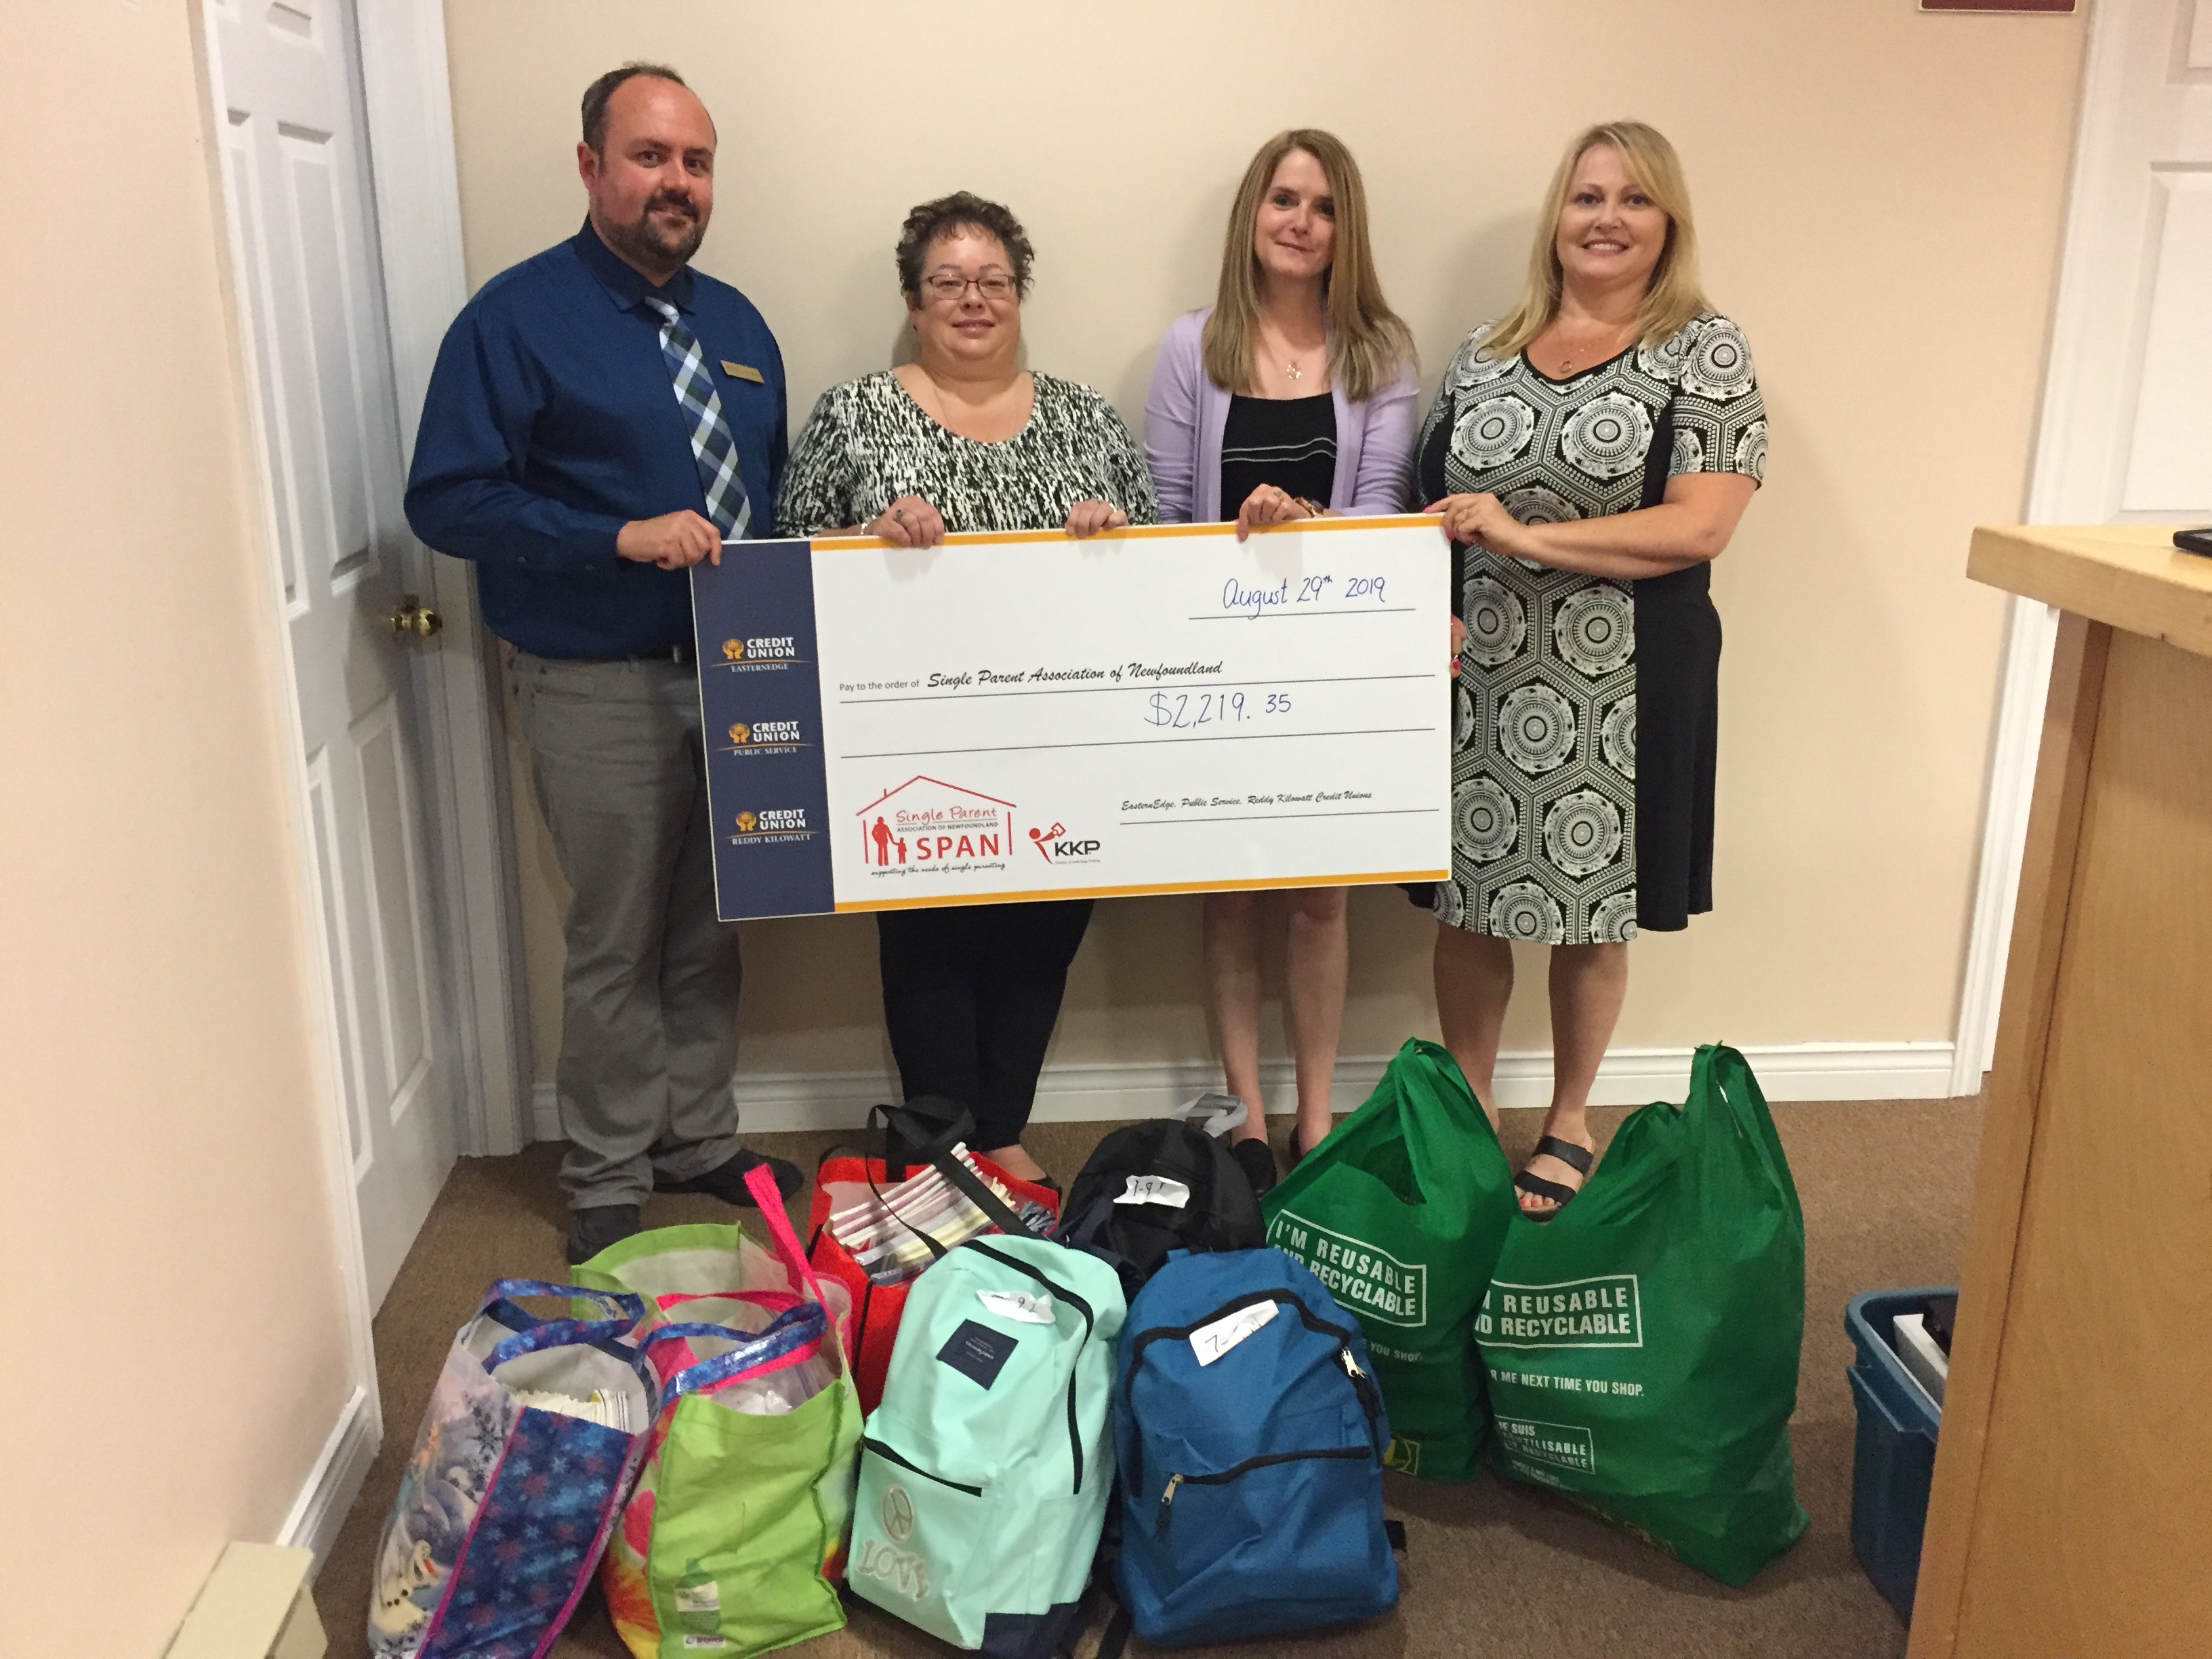 Public Service Credit Union along with Eastern Edge Credit Union and Reddy Kilowatt Credit Union help support Kids Back to School by raising $2,219 as well as school supplies. Many thanks to all three CUs and its members for their support.